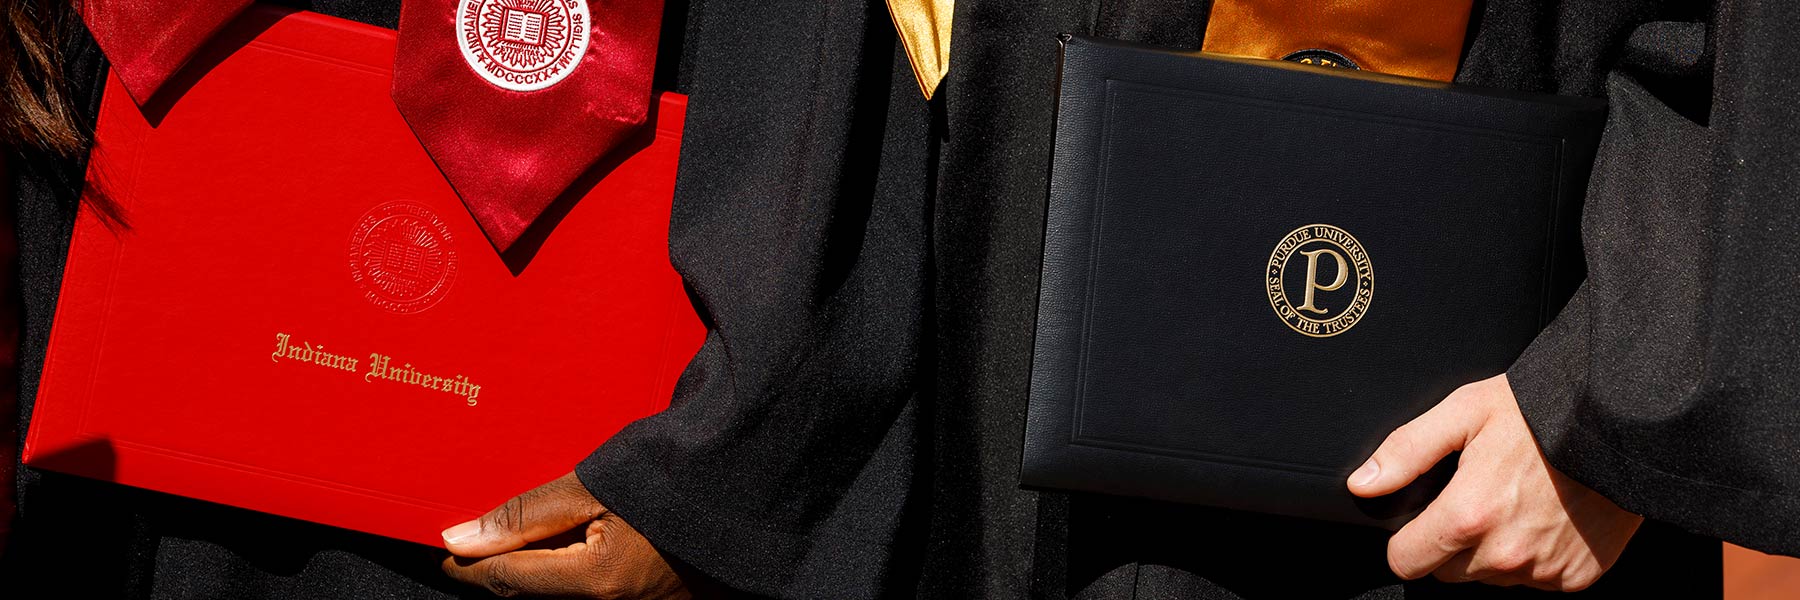 Detail image of two graduates holding diploma covers in their hand by their side—one diploma is for IU and one is for Purdue.